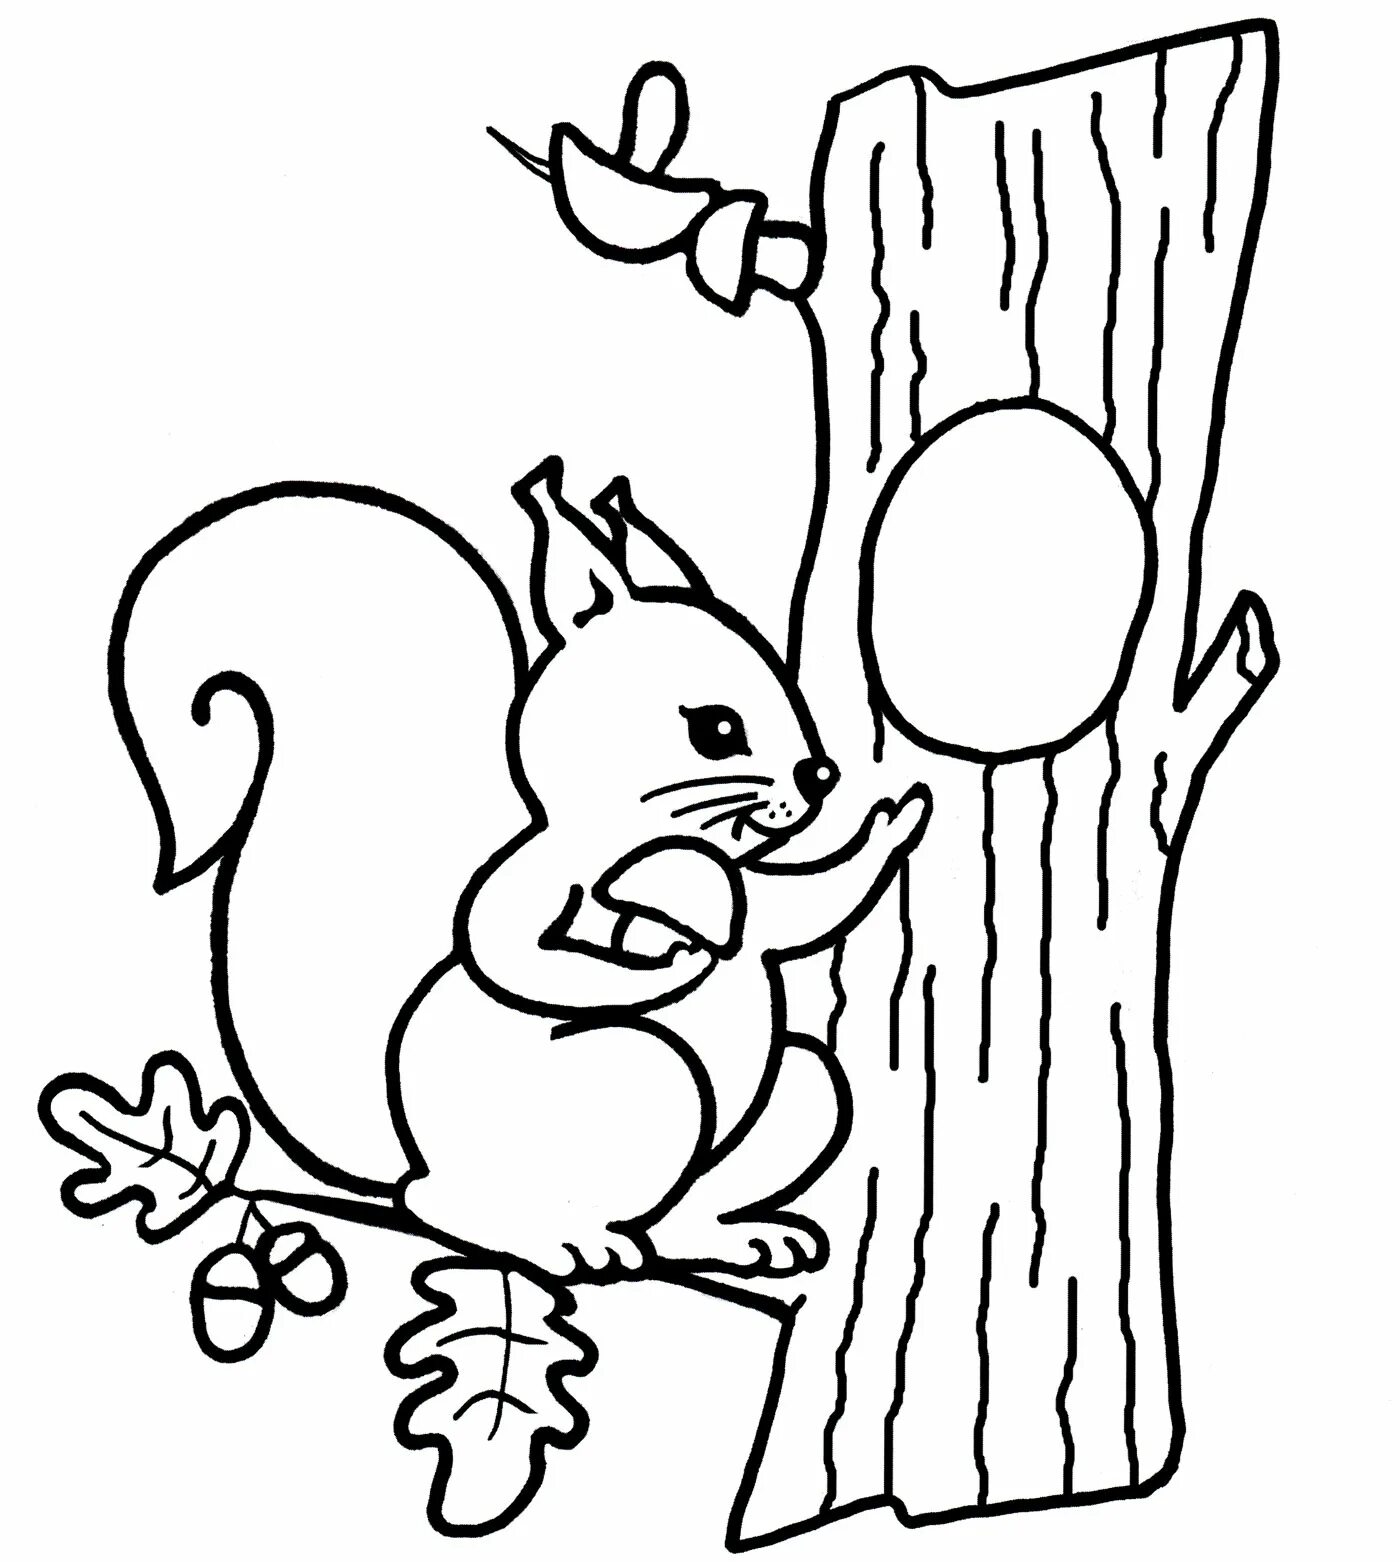 Squirrel in hollow #11